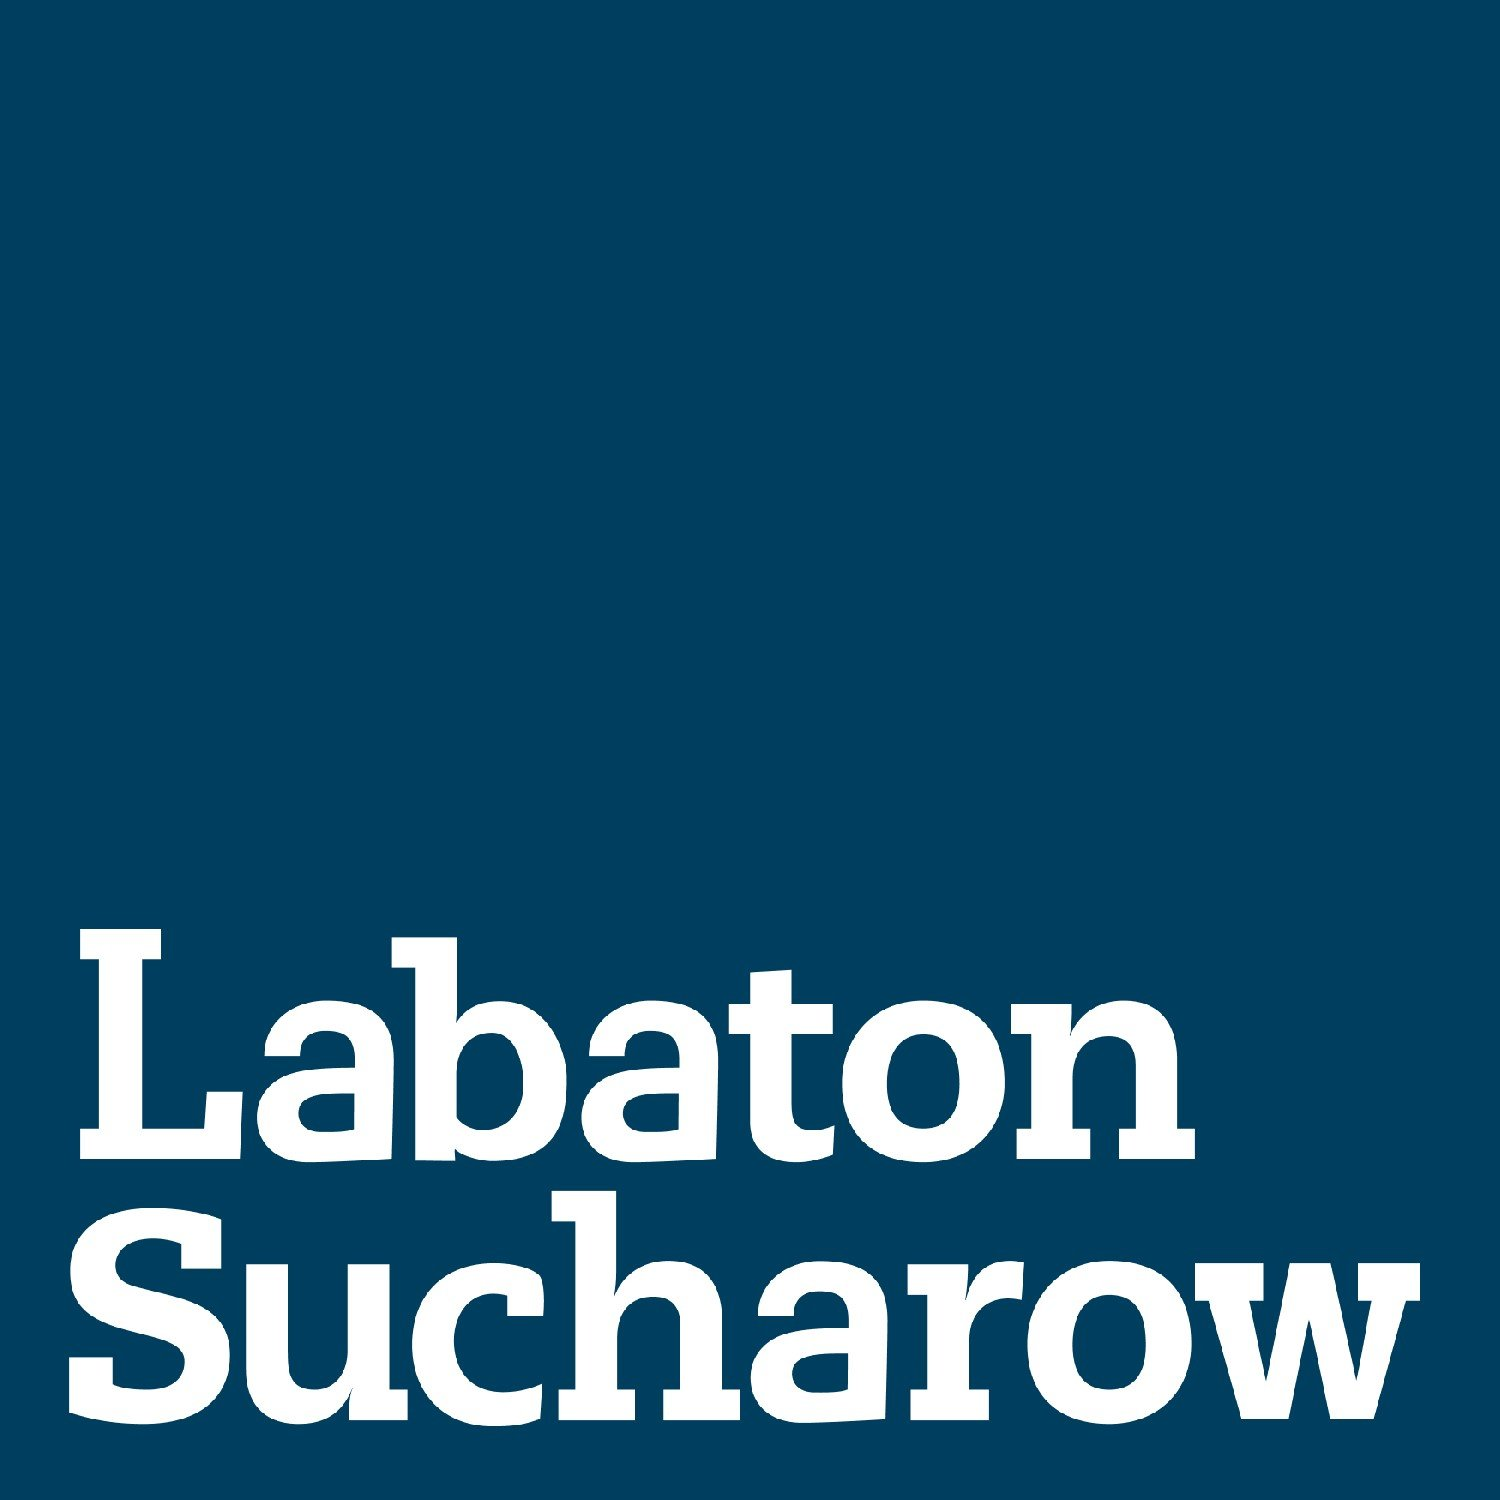 Labaton Sucharow LLP, Monday, May 3, 2021, Press release picture